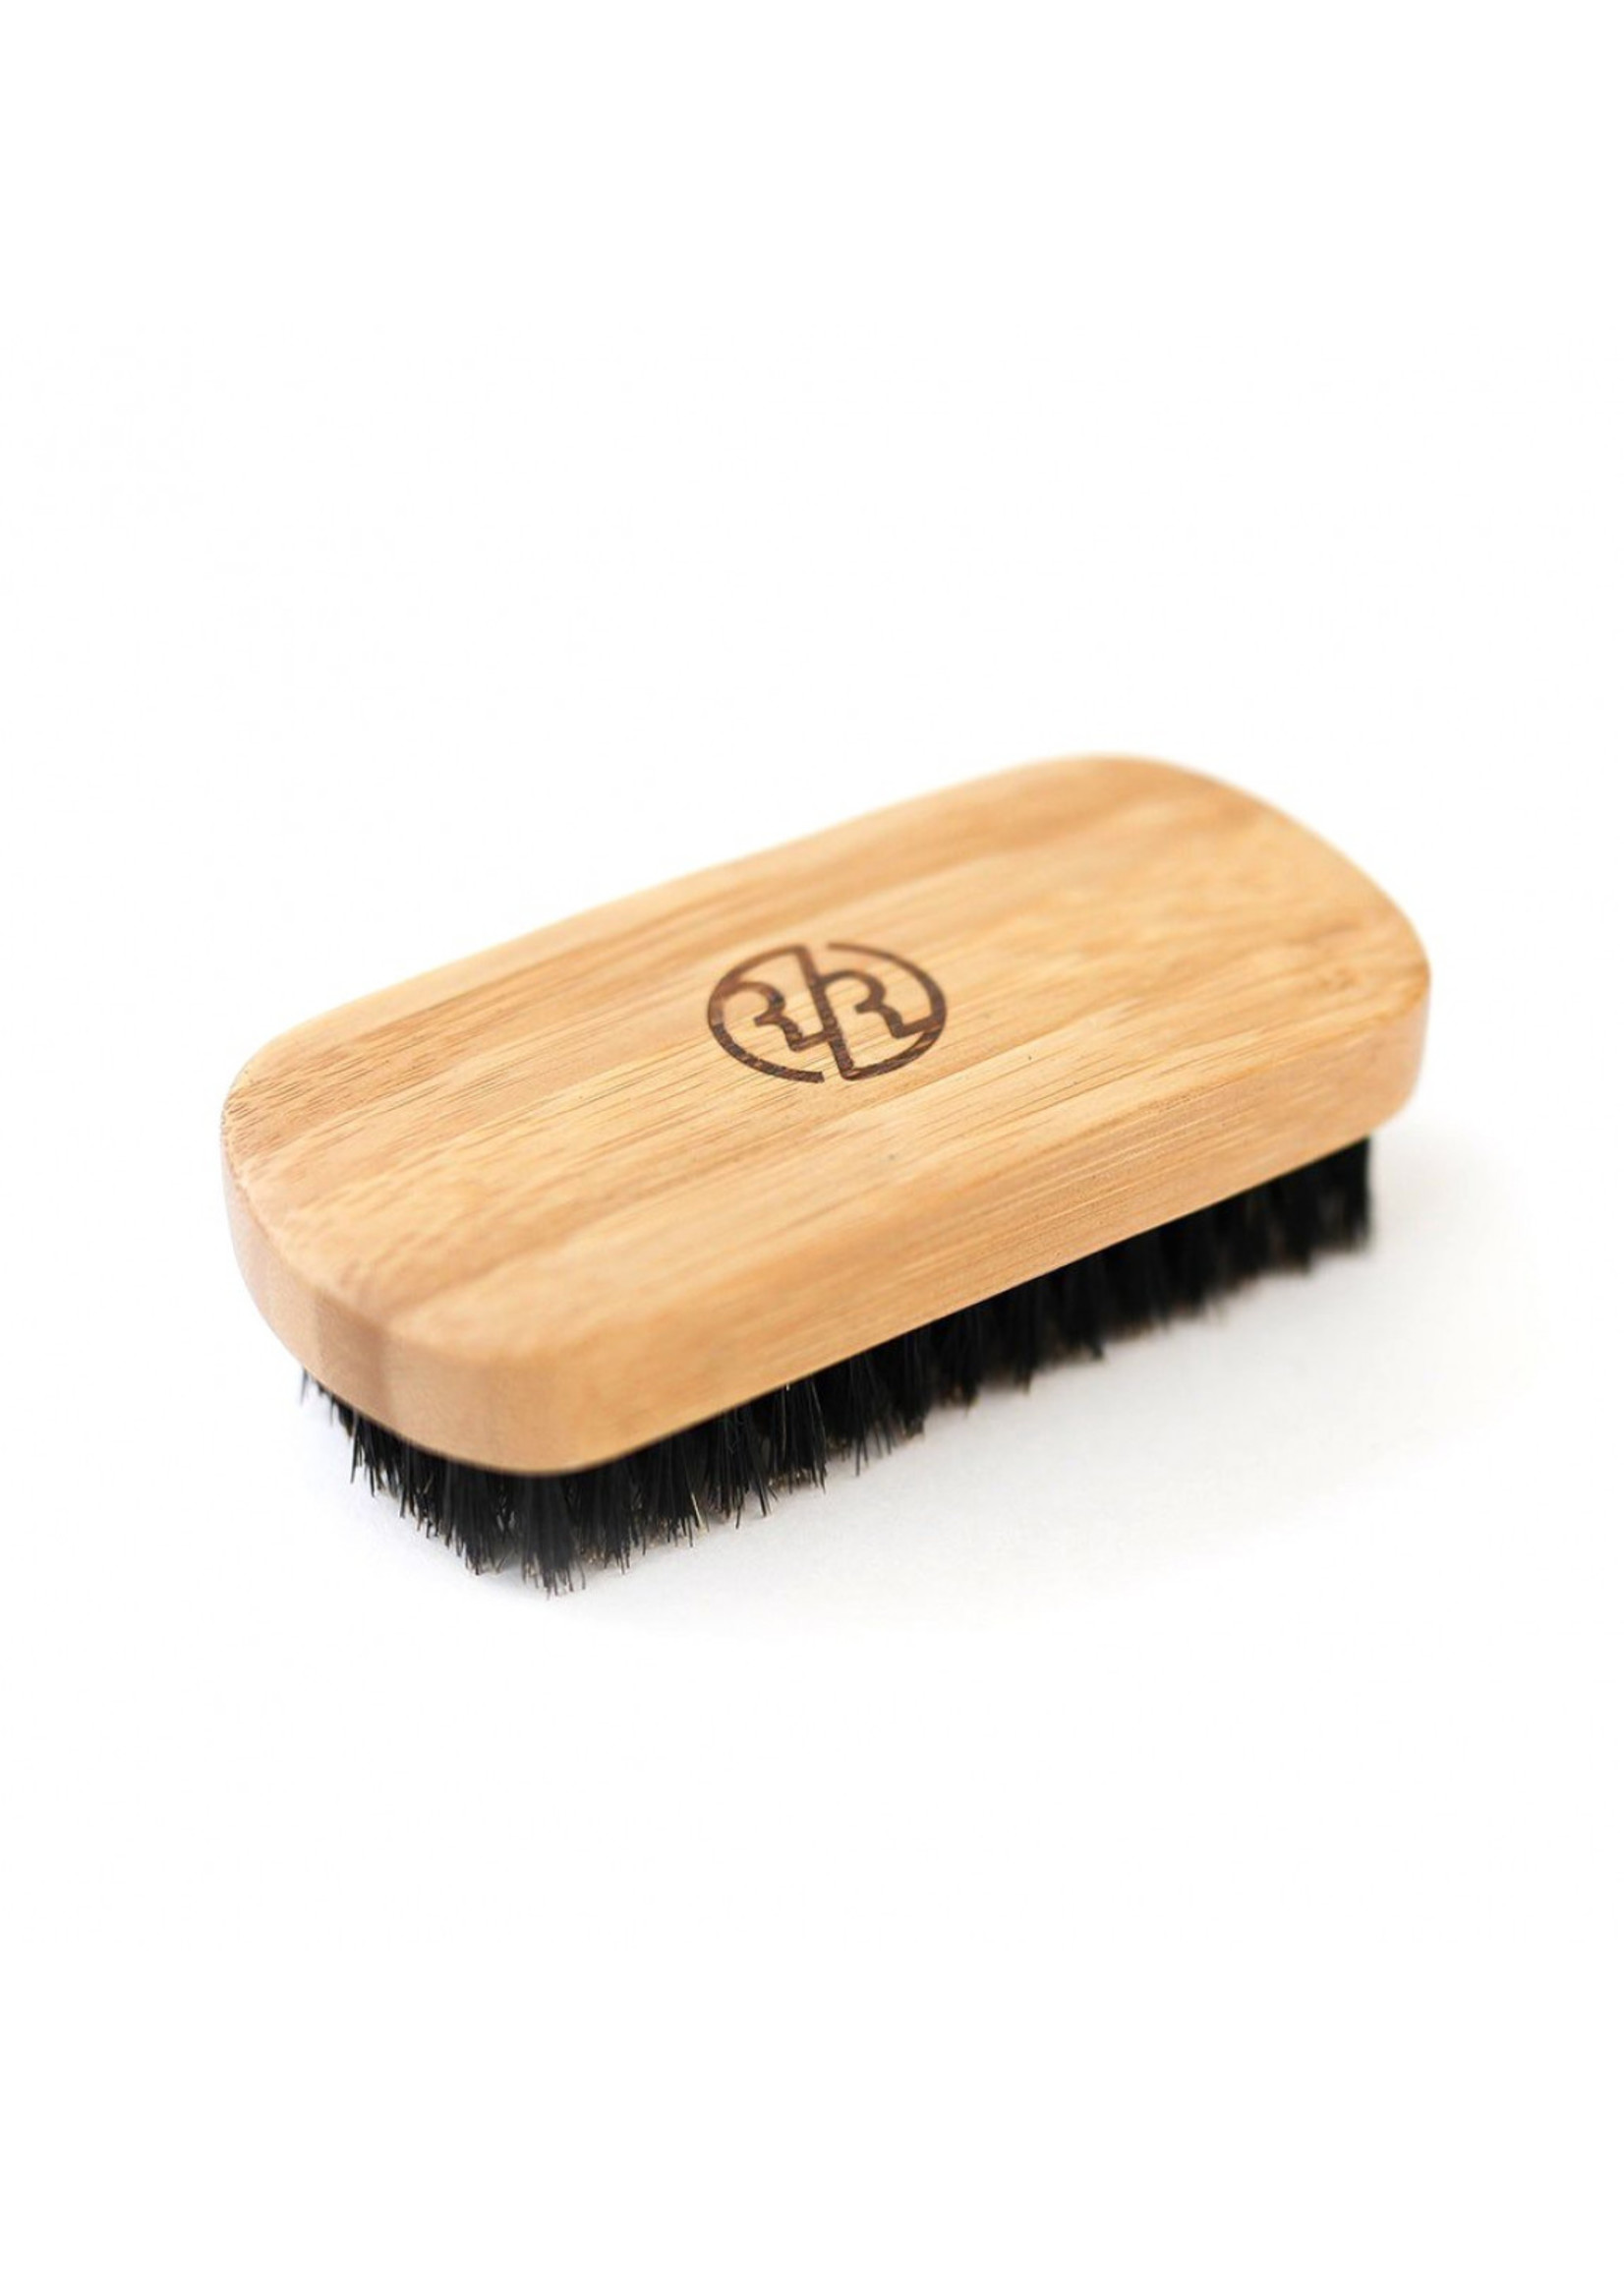 ROCKWELL RR-959822 RR BROSSE POUR BARBE SANGLIER